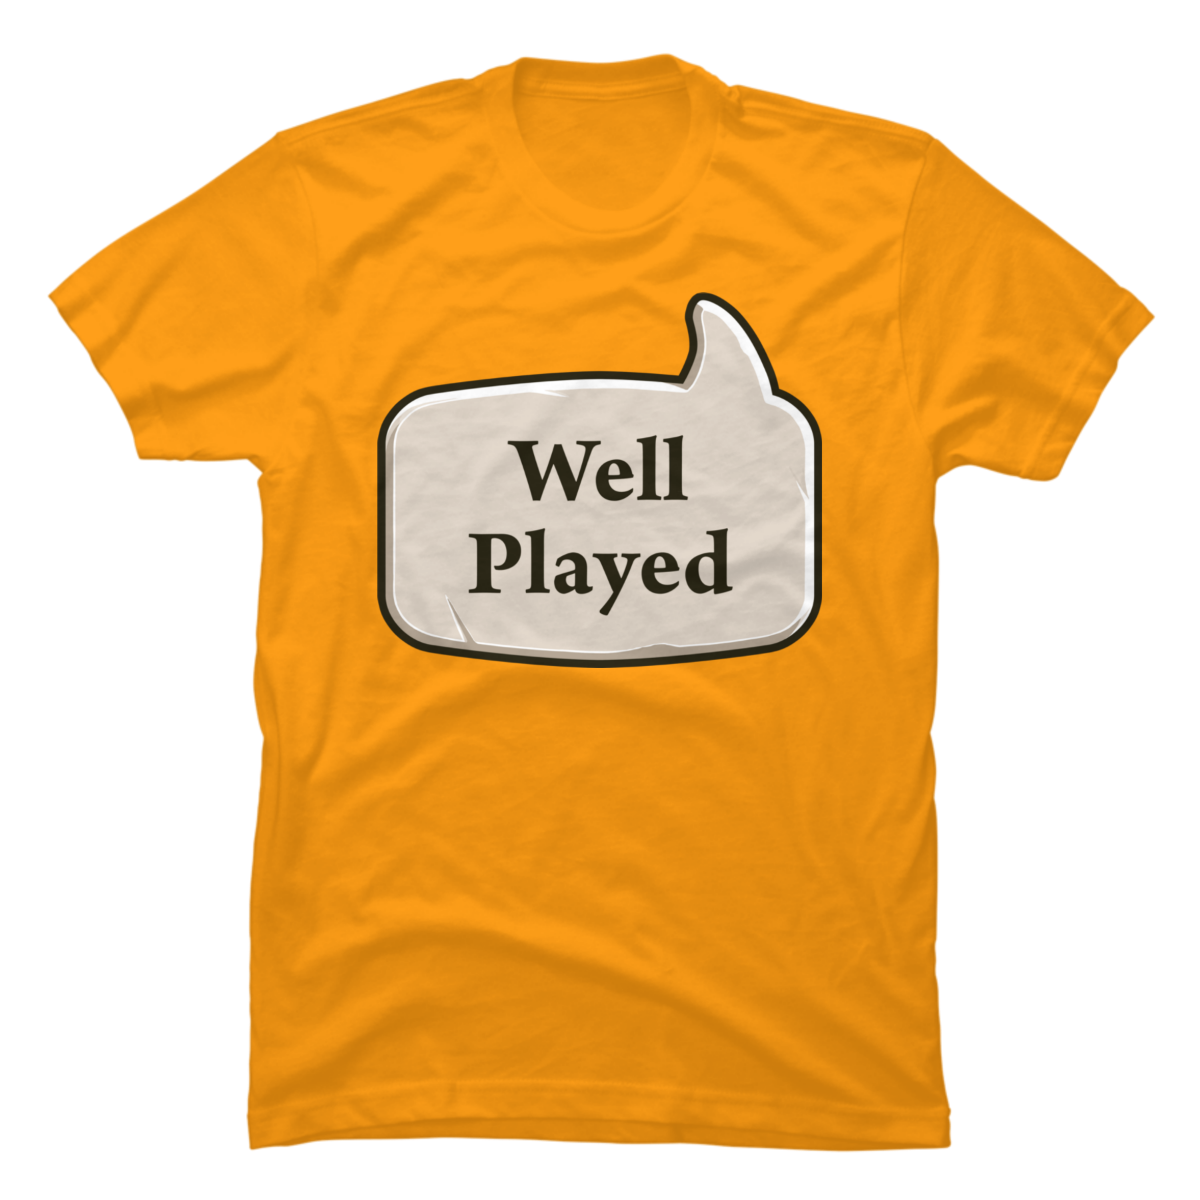 hearthstone well played shirt